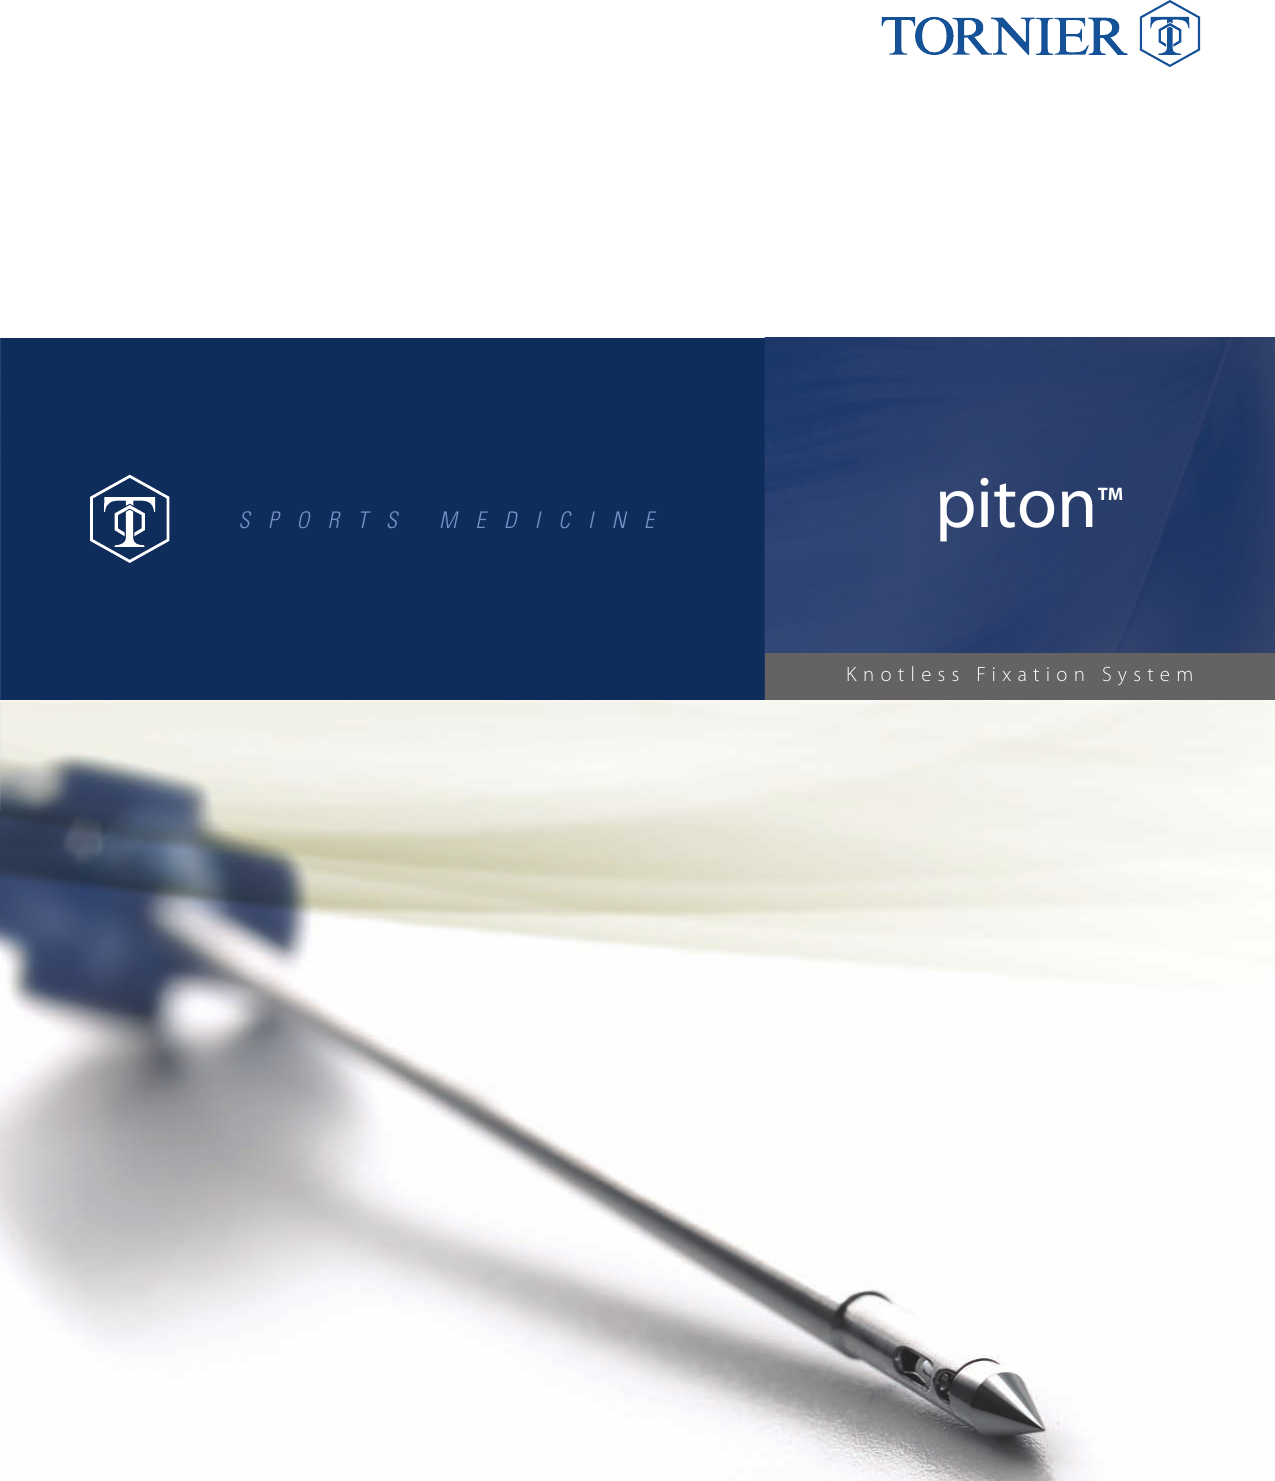 Page 1 of 6 - Piton Brochure